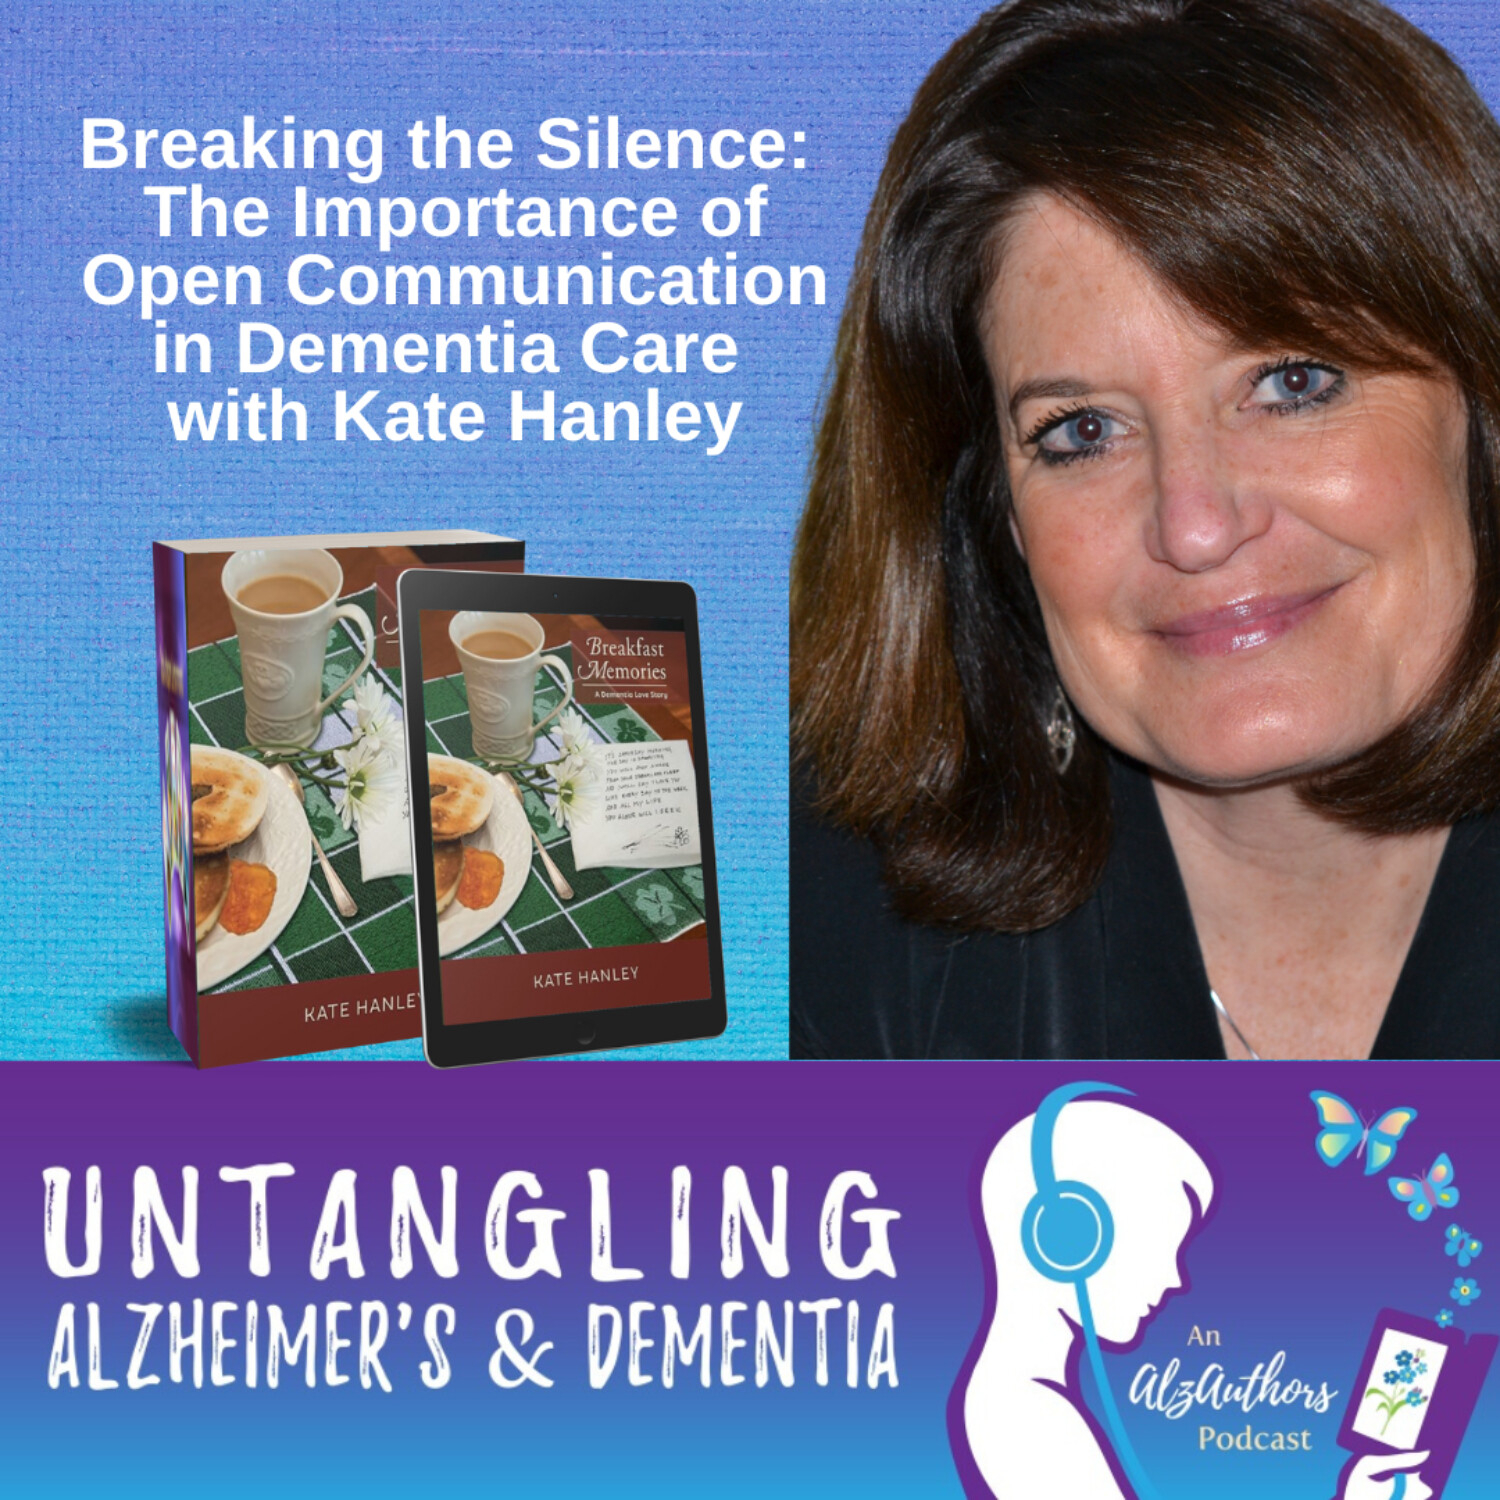 The Importance of Open Communication in Dementia Care with Kate Hanley